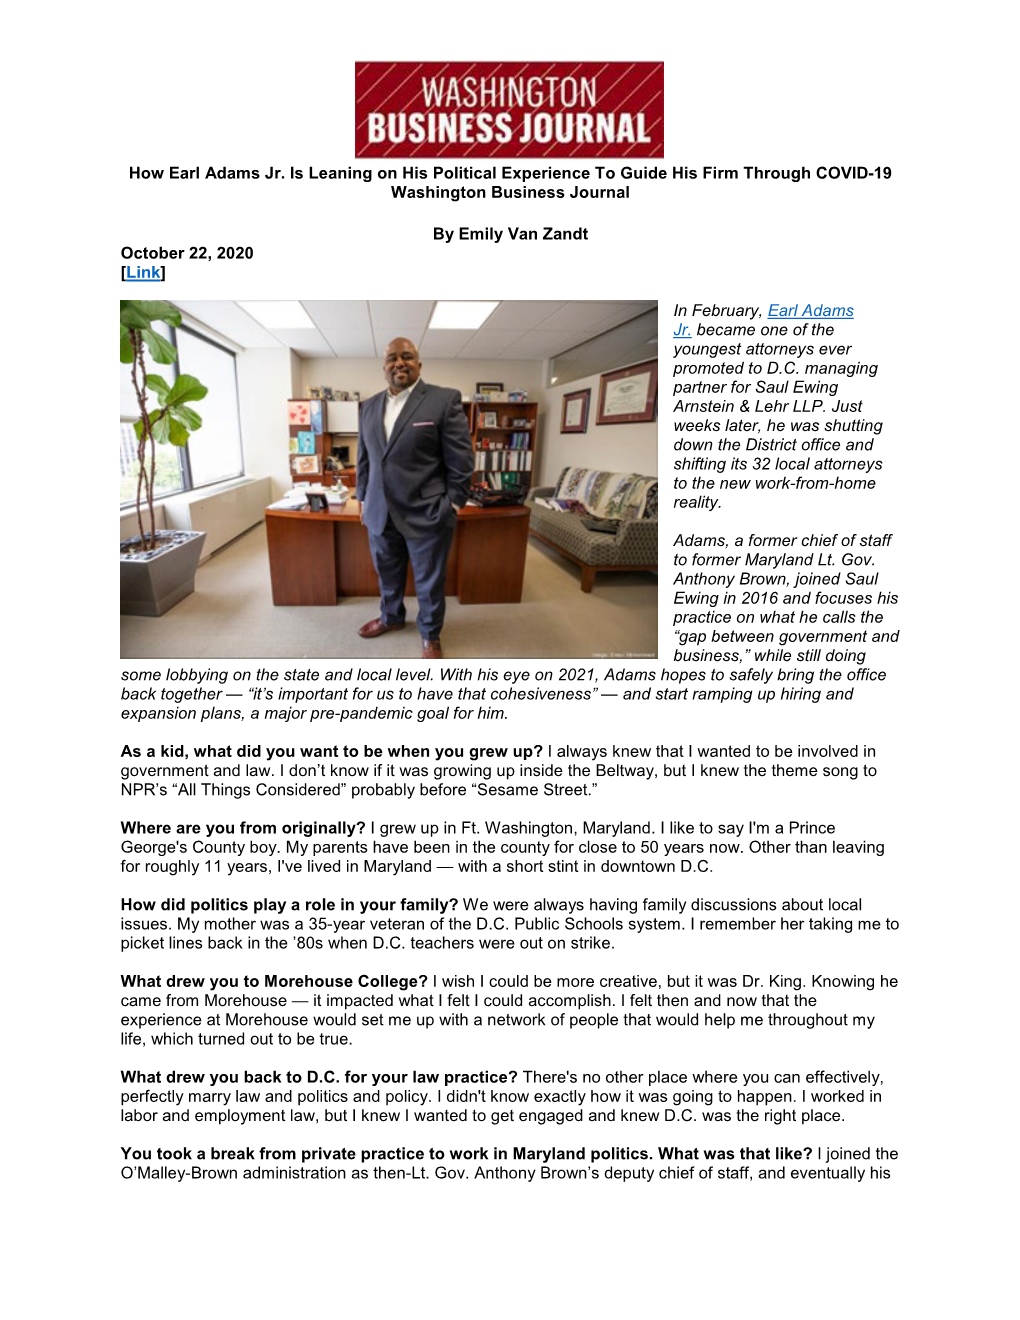 How Earl Adams Jr. Is Leaning on His Political Experience to Guide His Firm Through COVID-19 Washington Business Journal